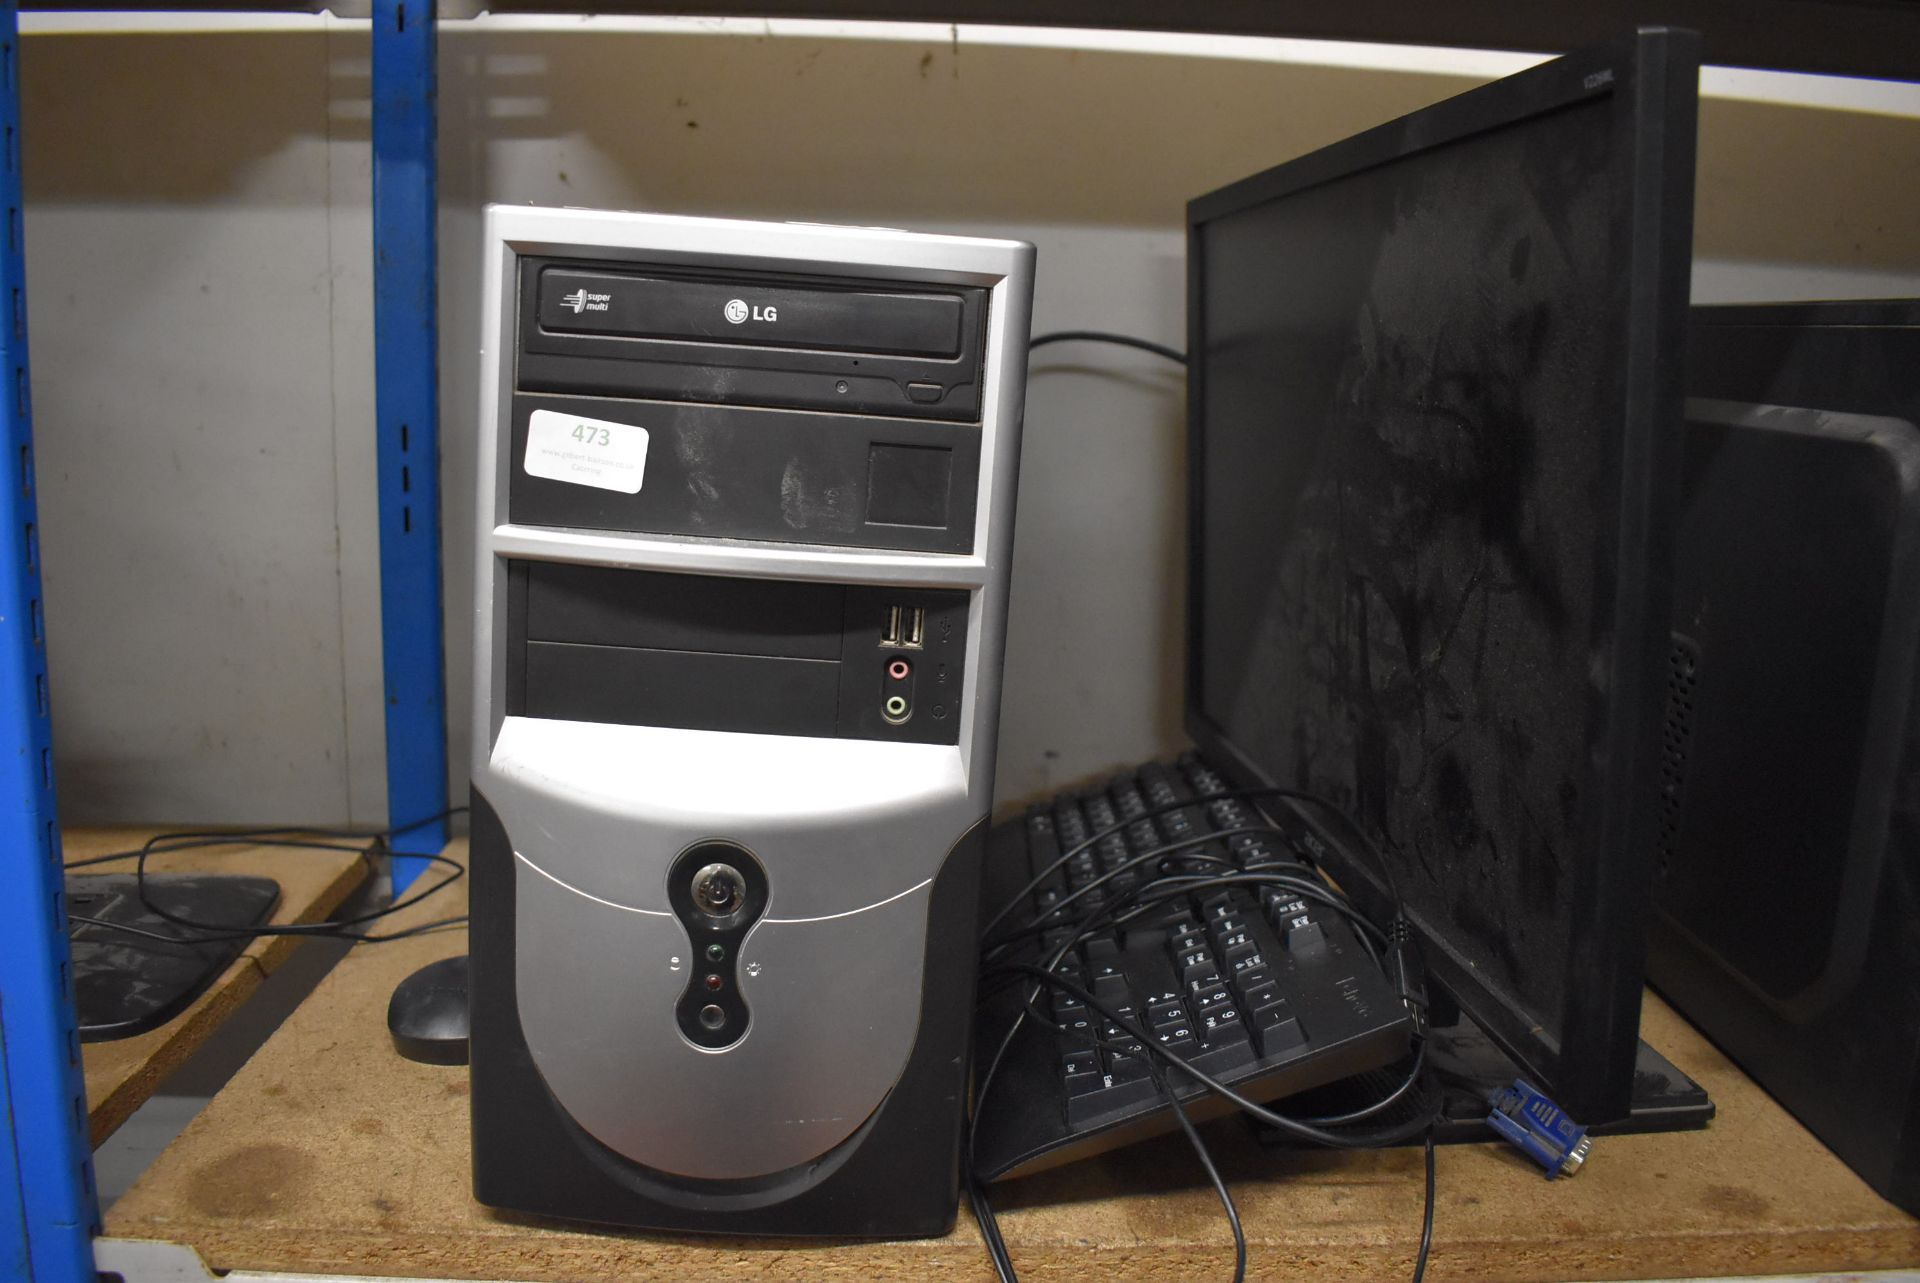 *Desktop PC with Monitor, Keyboard, and Mouse